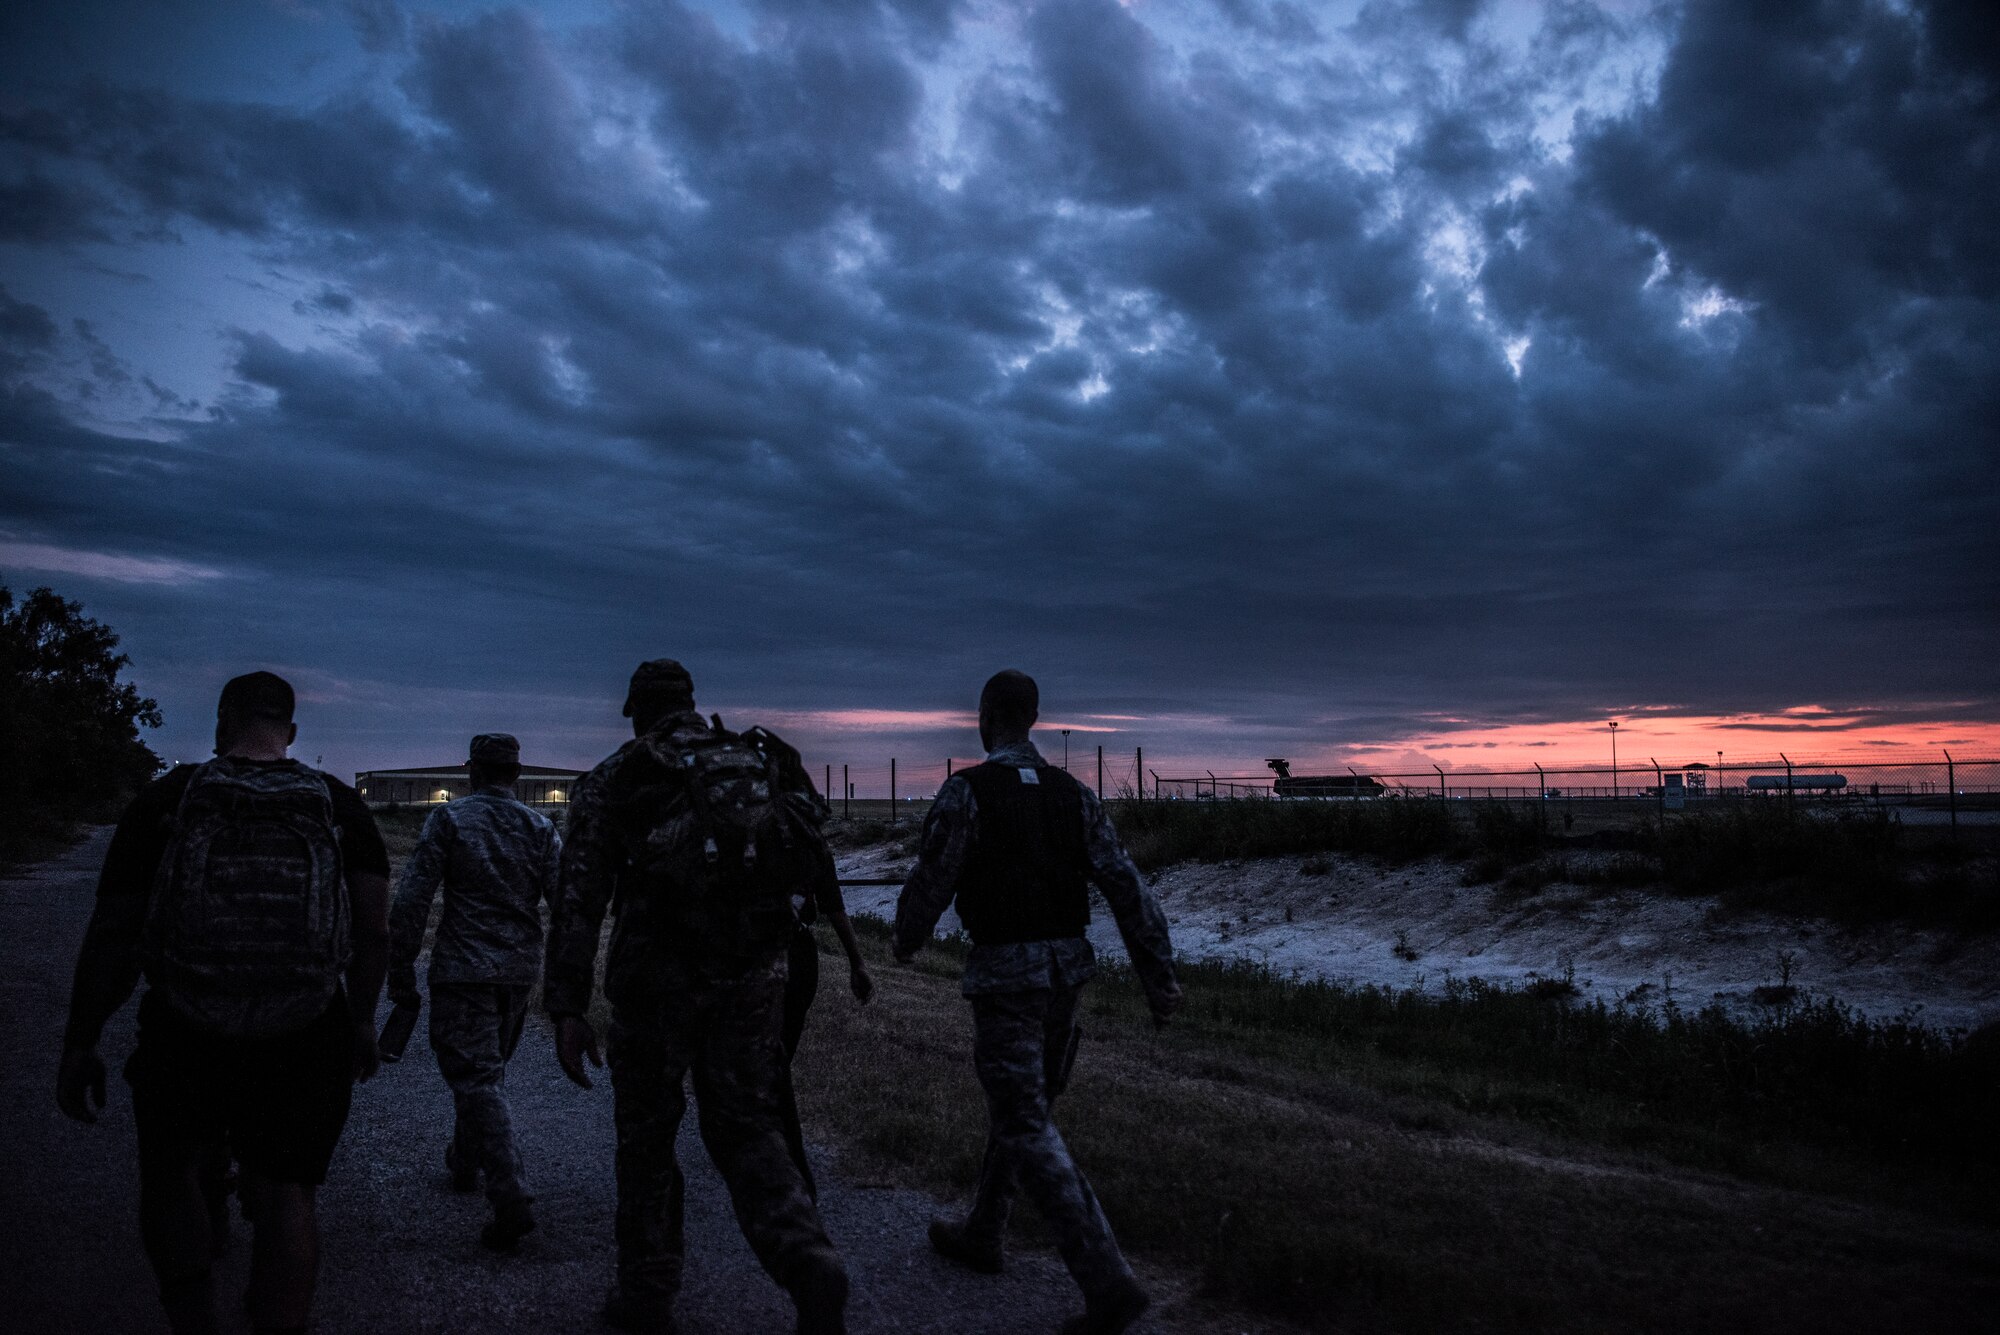 Members of Laughlin Air Force Base, Texas, ruck march for 5 kilometers on July 23, 2019. “Walk with the Chief” is a monthly opportunity to interact with Laughlin’s command chief, Chief Master Sgt. Robert Zackery III, in a fun and informal setting, and prepare Airmen for a deployed environment. (U.S. Air Force photo by Airman 1st Class Marco A. Gomez)